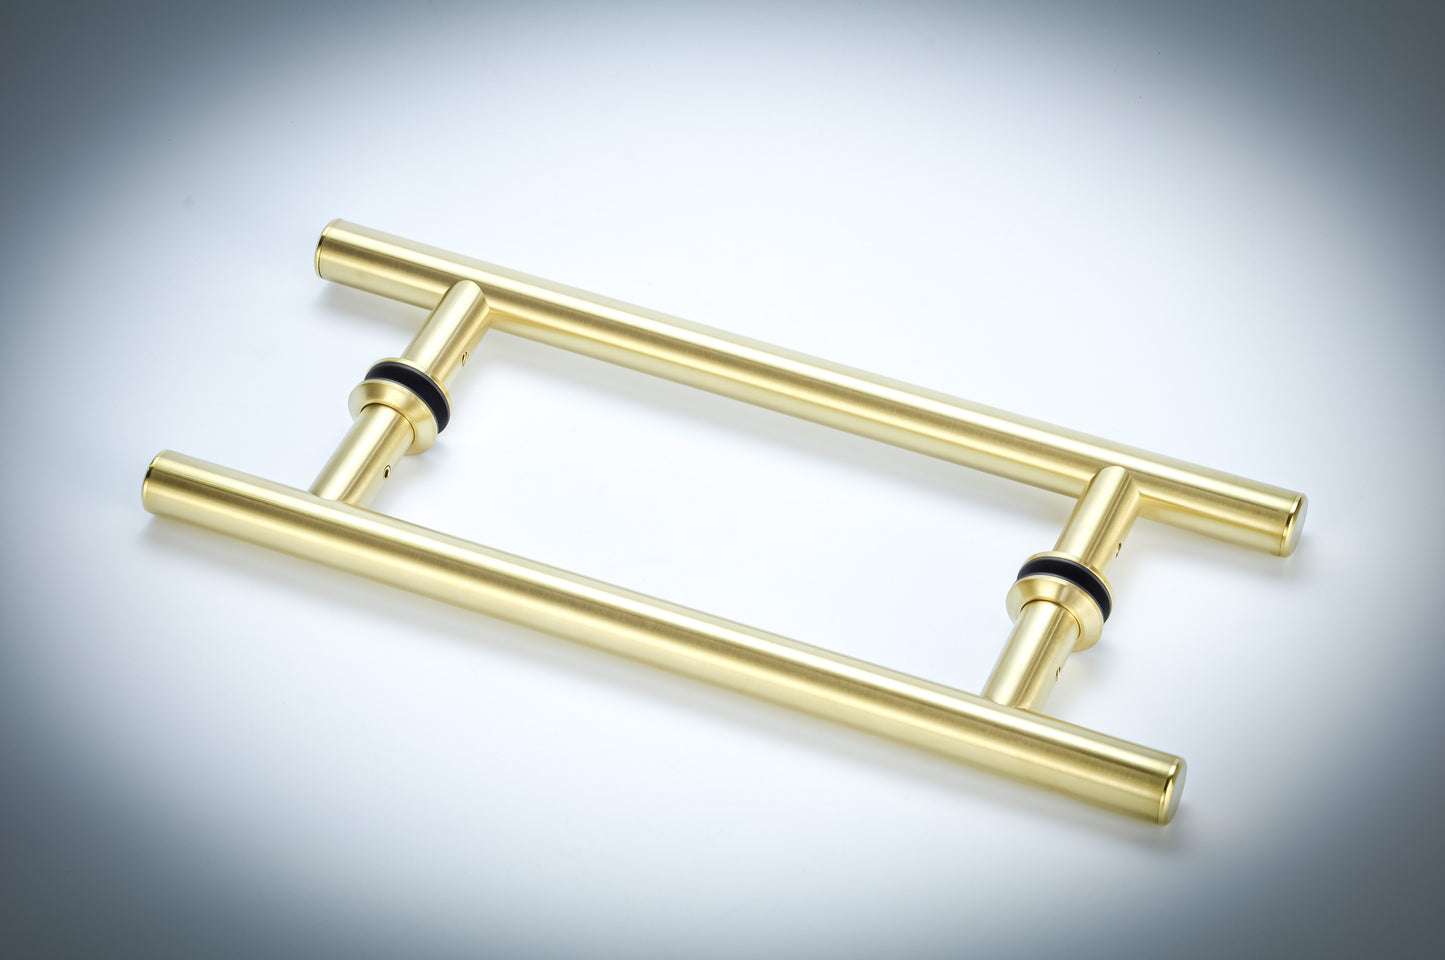 8" Ladder Pull Solid Brass Back to Back Handles - For Glass Shower Doors